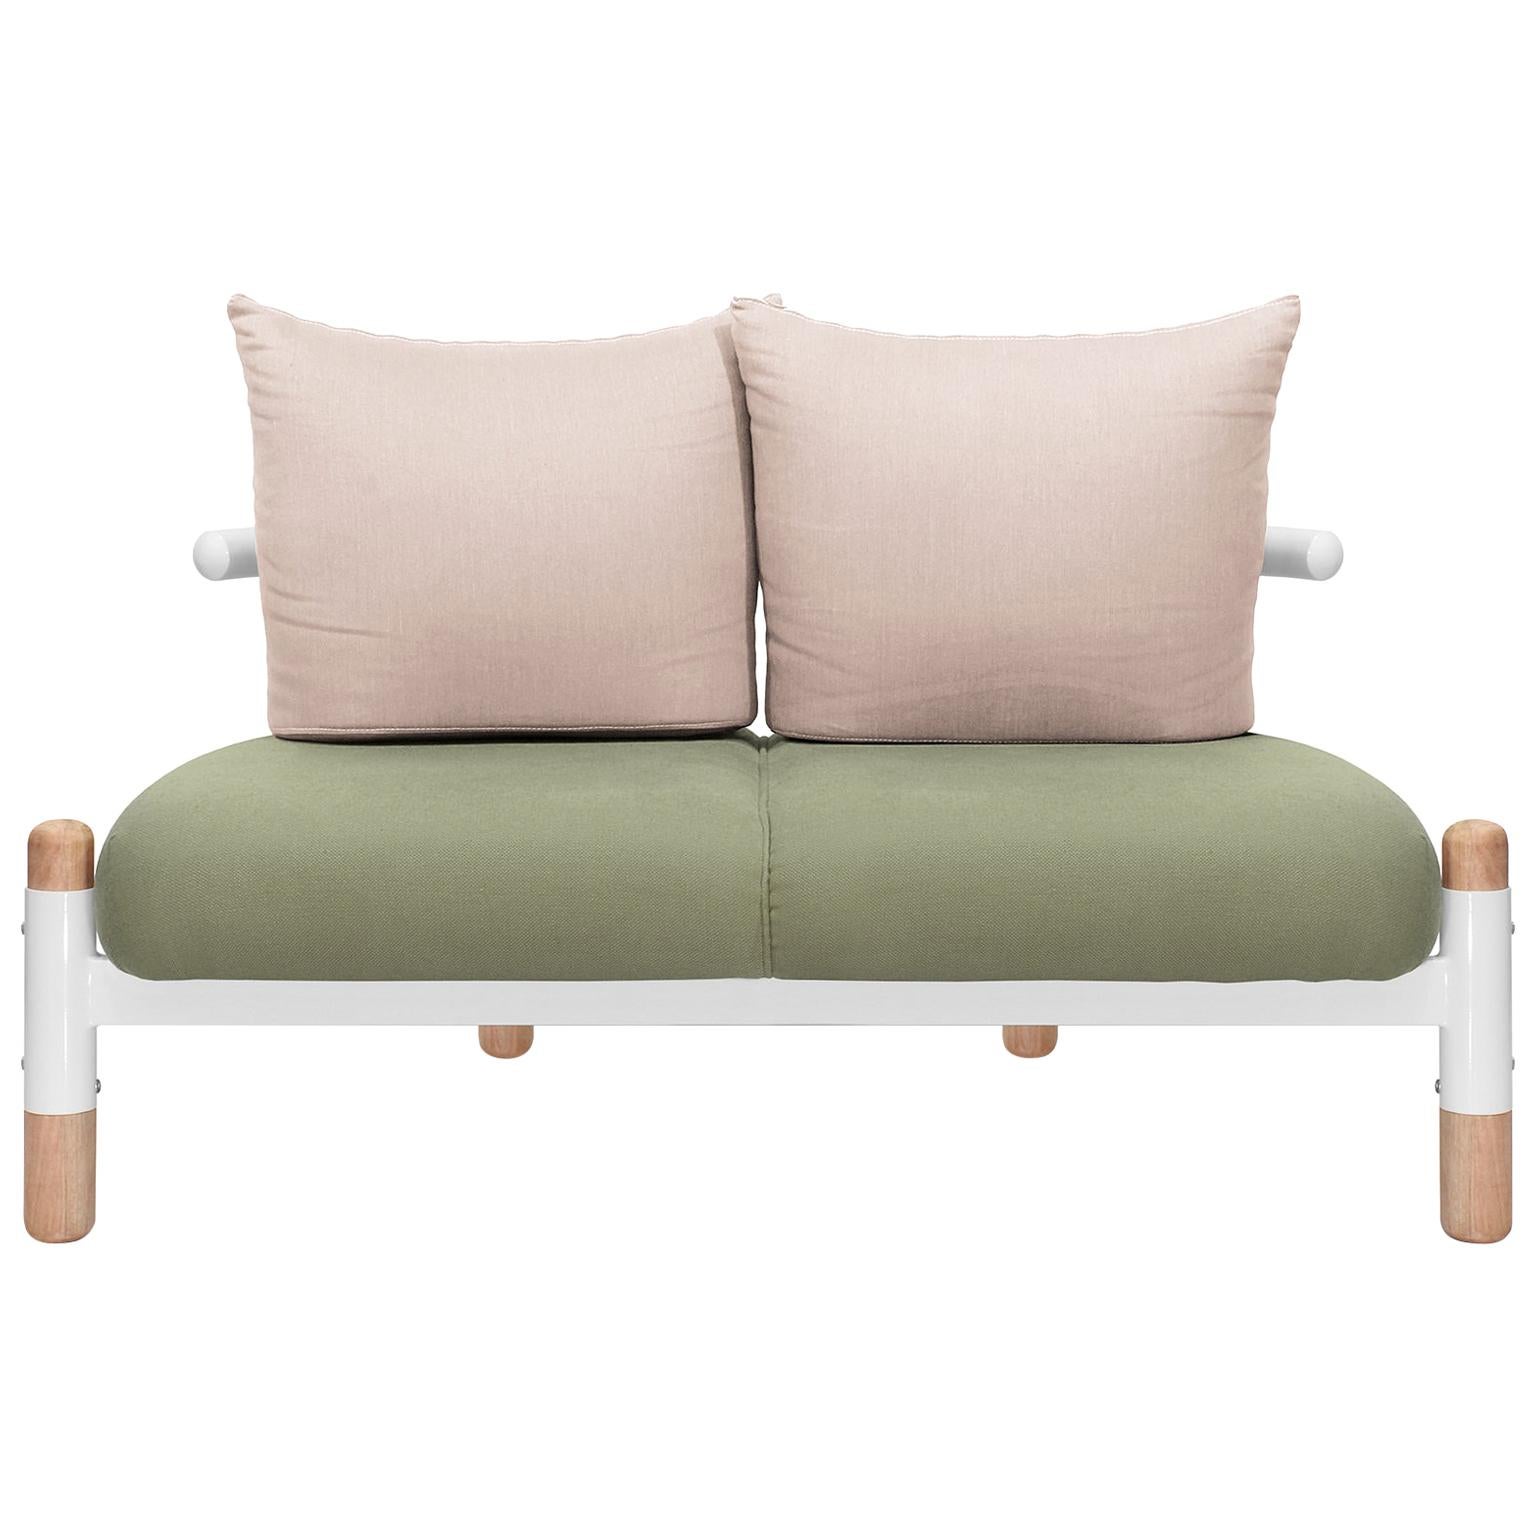 Green PK15 Two-Seat Sofa, Carbon Steel Structure & Wood Legs by Paulo Kobylka